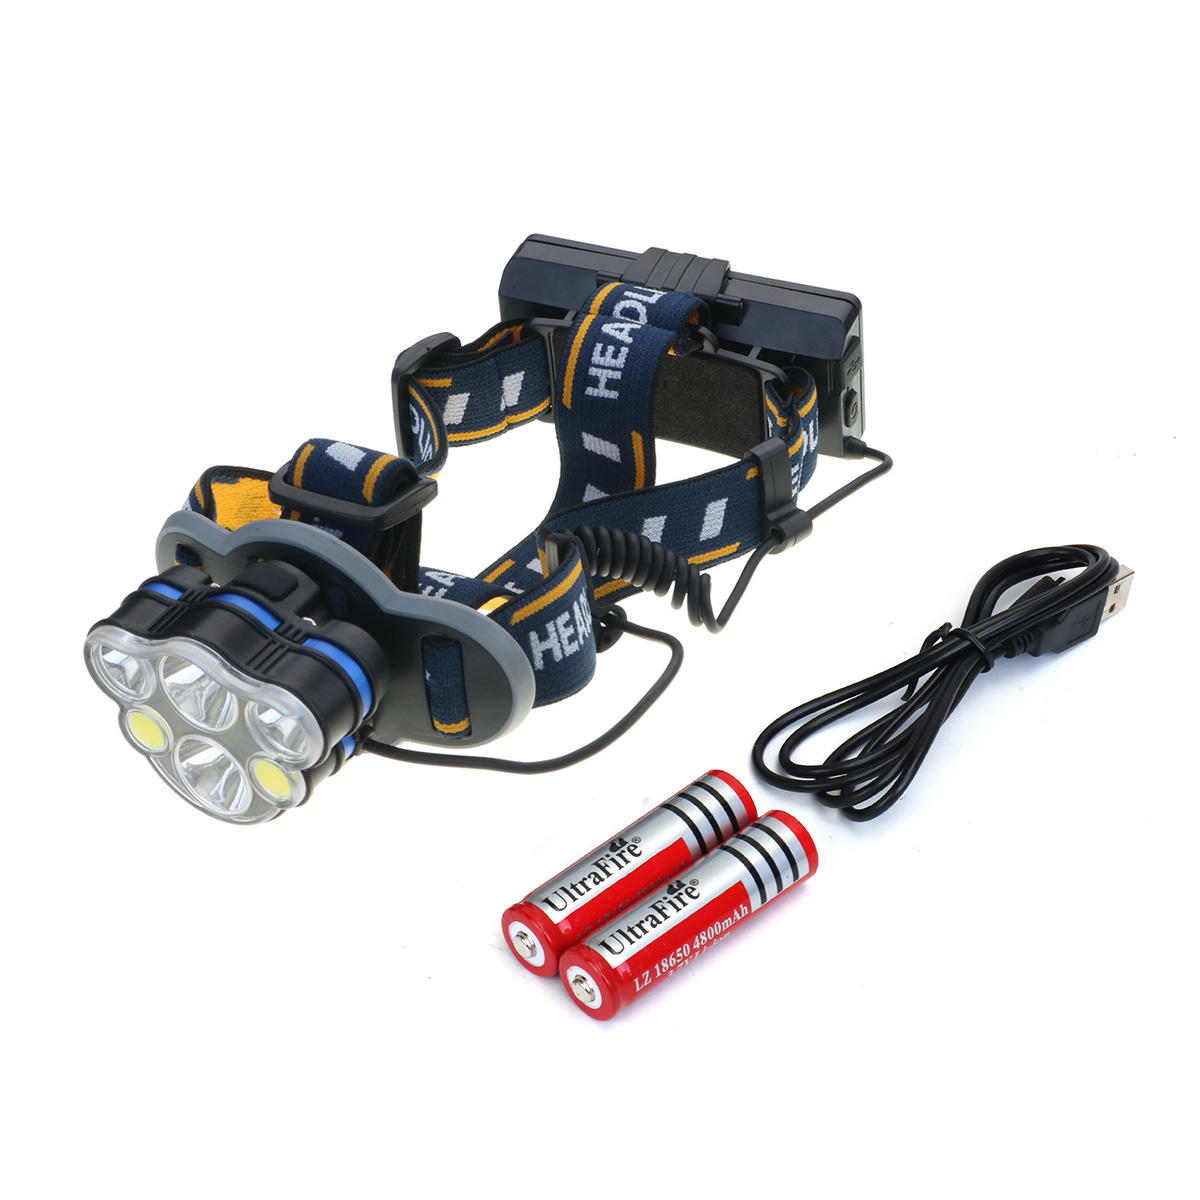 

XANES 2606-6 2300LM 2*T6+2*XPE+2*COB Bike Bicycle Headlamp 8 Modes With 2*18650 Battery USB Interface